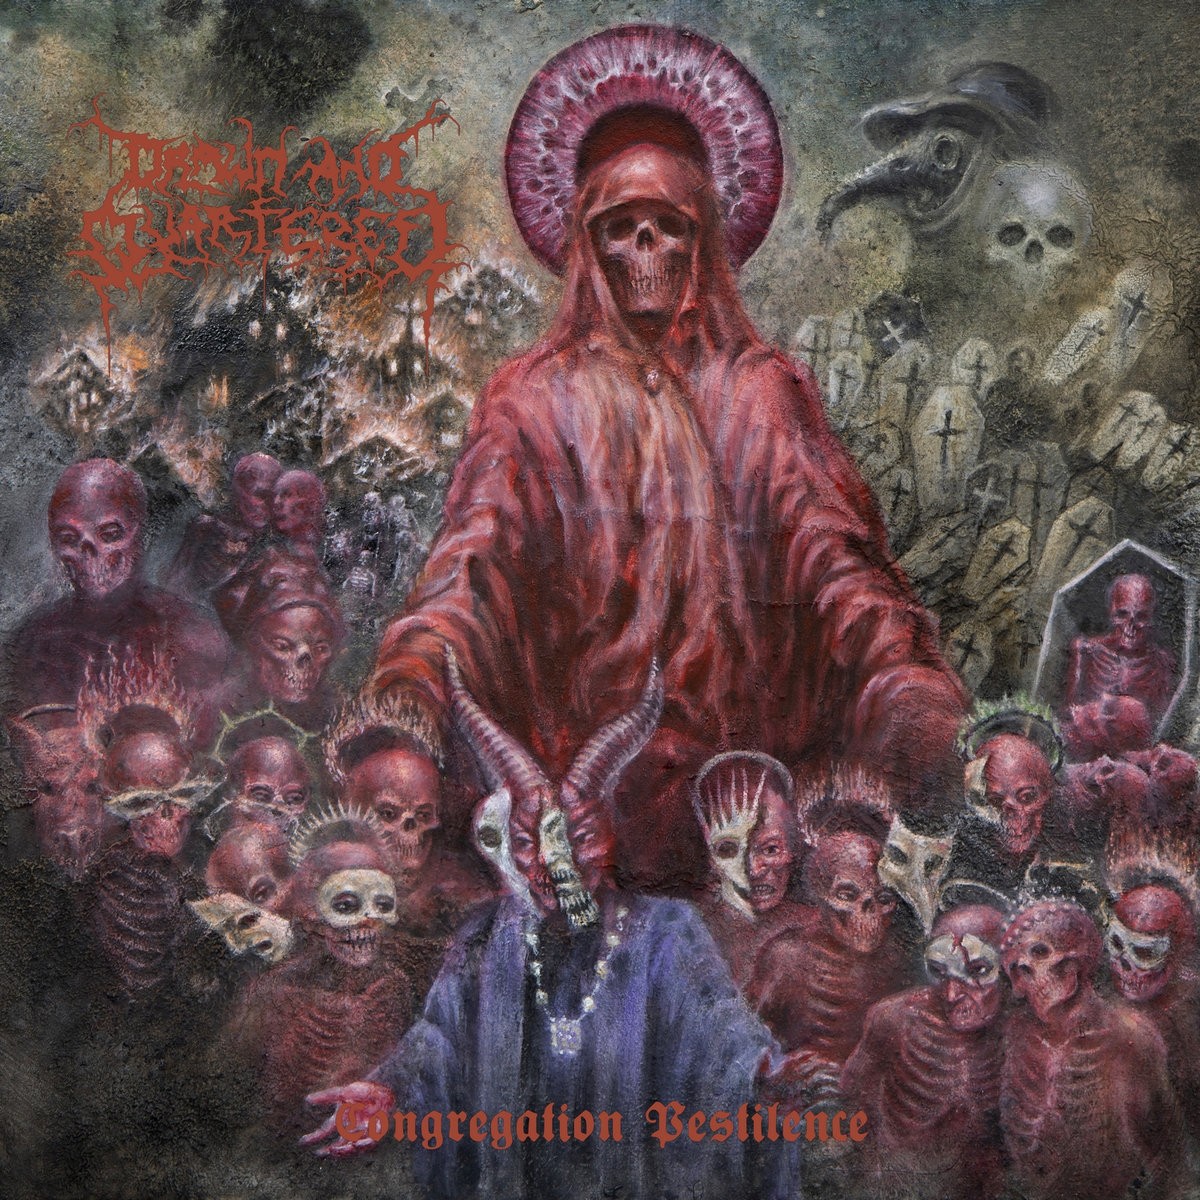 Drawn and Quartered - Congregation Pestilence (2021) Cover